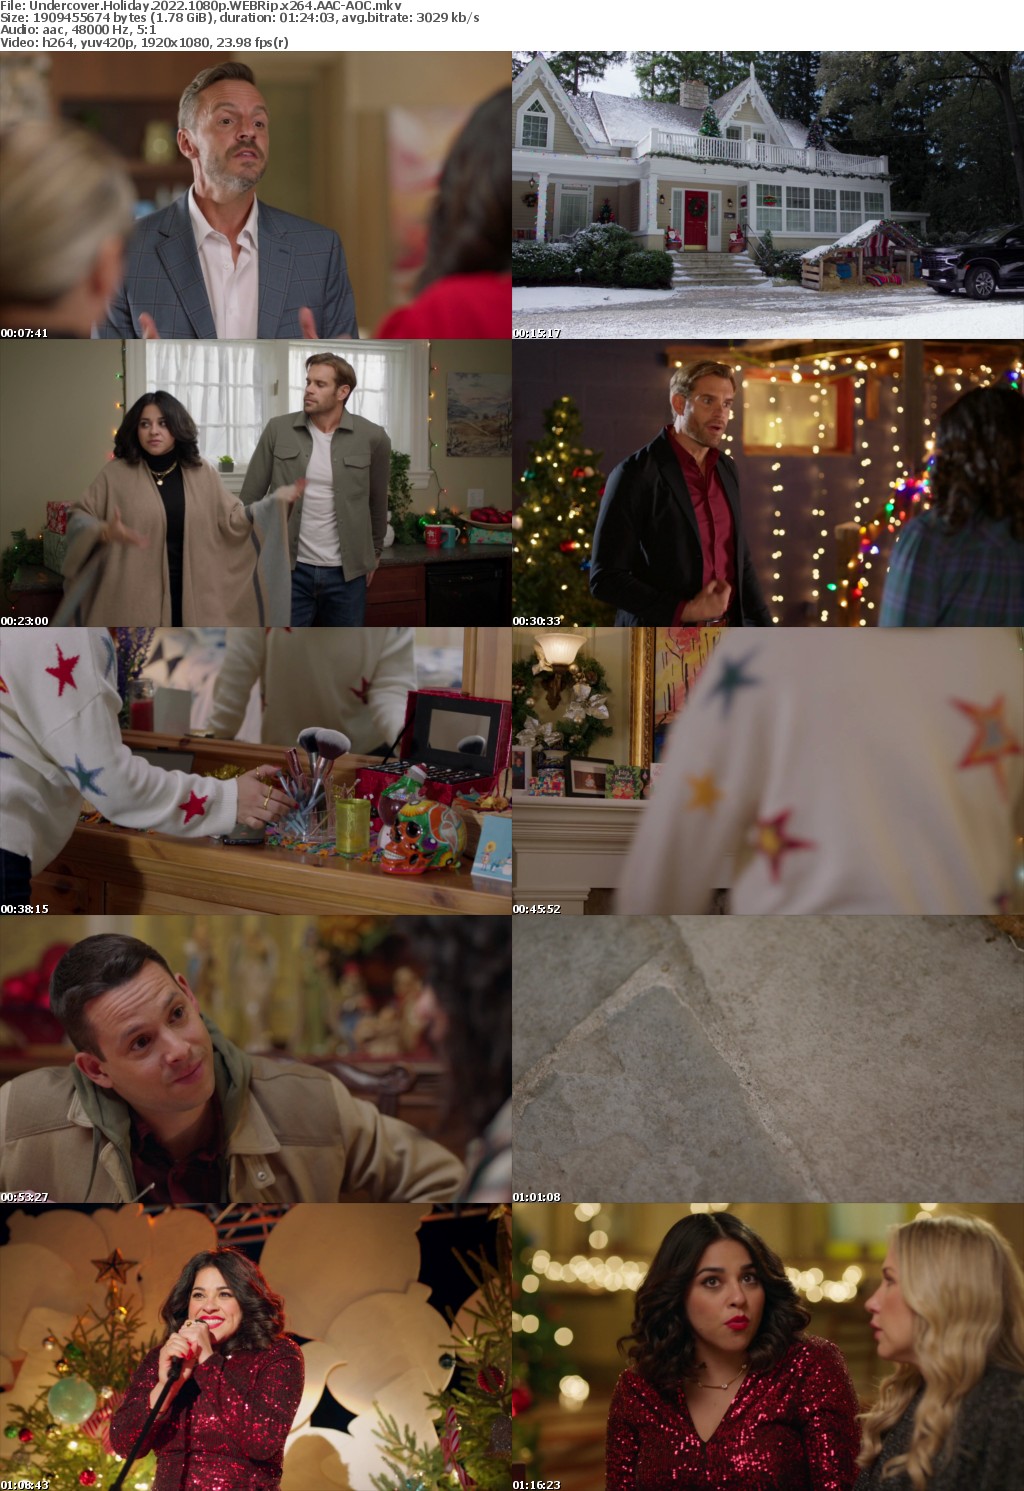 Undercover Holiday 2022 1080p WEBRip x264 AAC-AOC